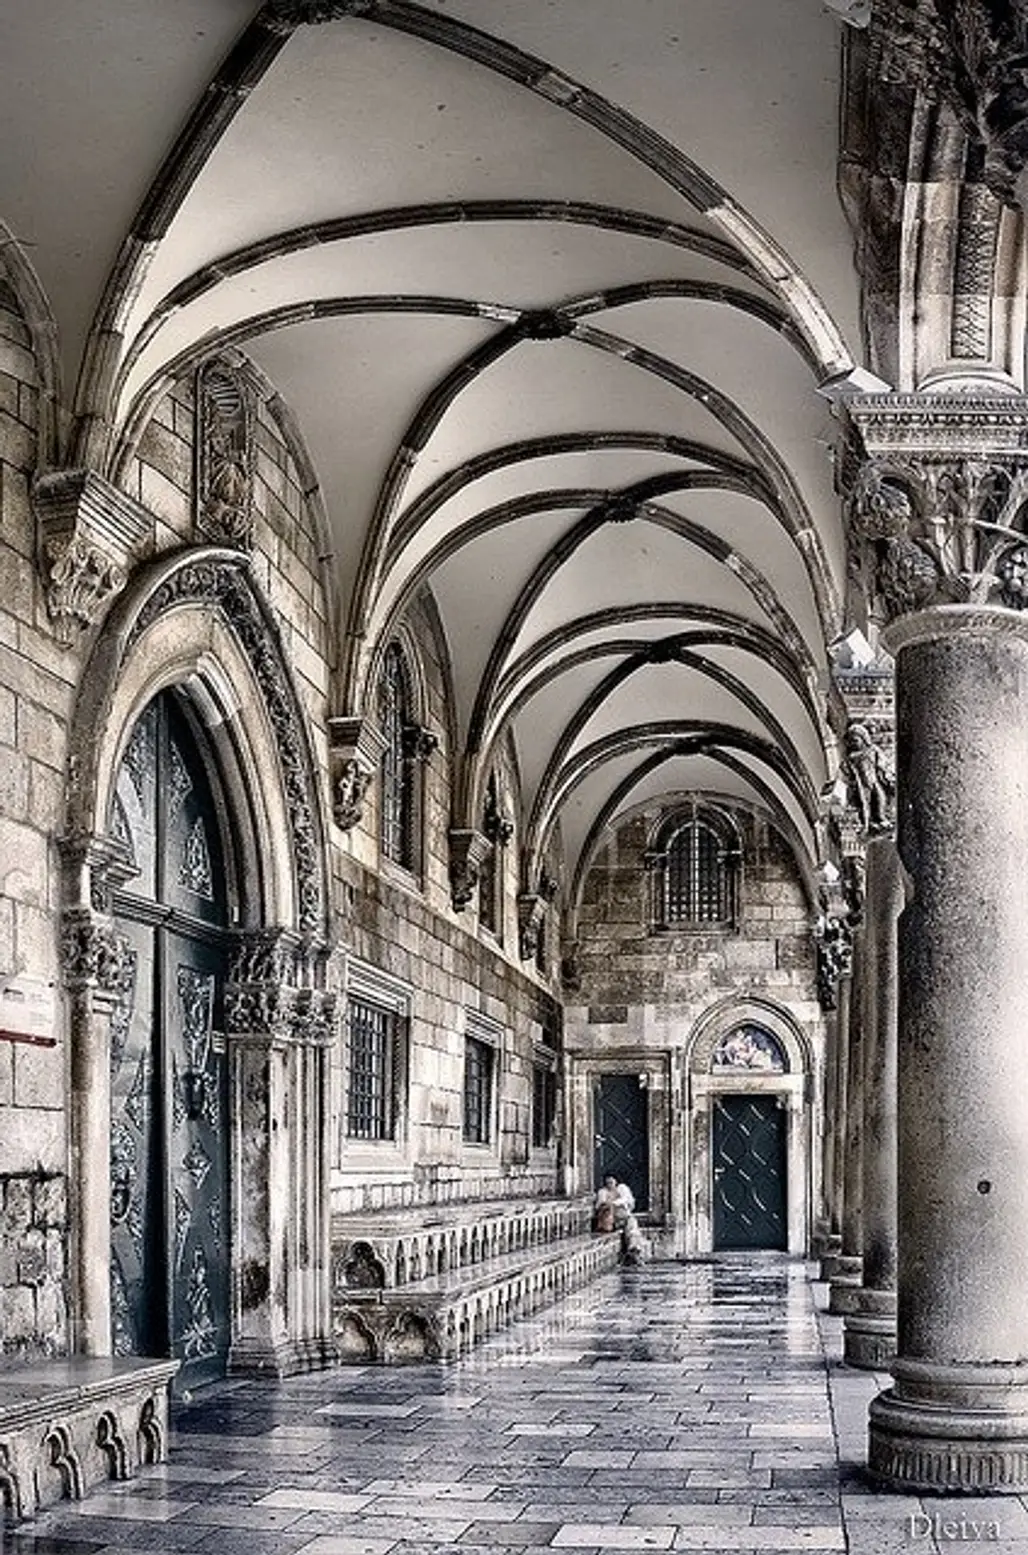 The Rector's Palace, Old Town, Dubrovnik